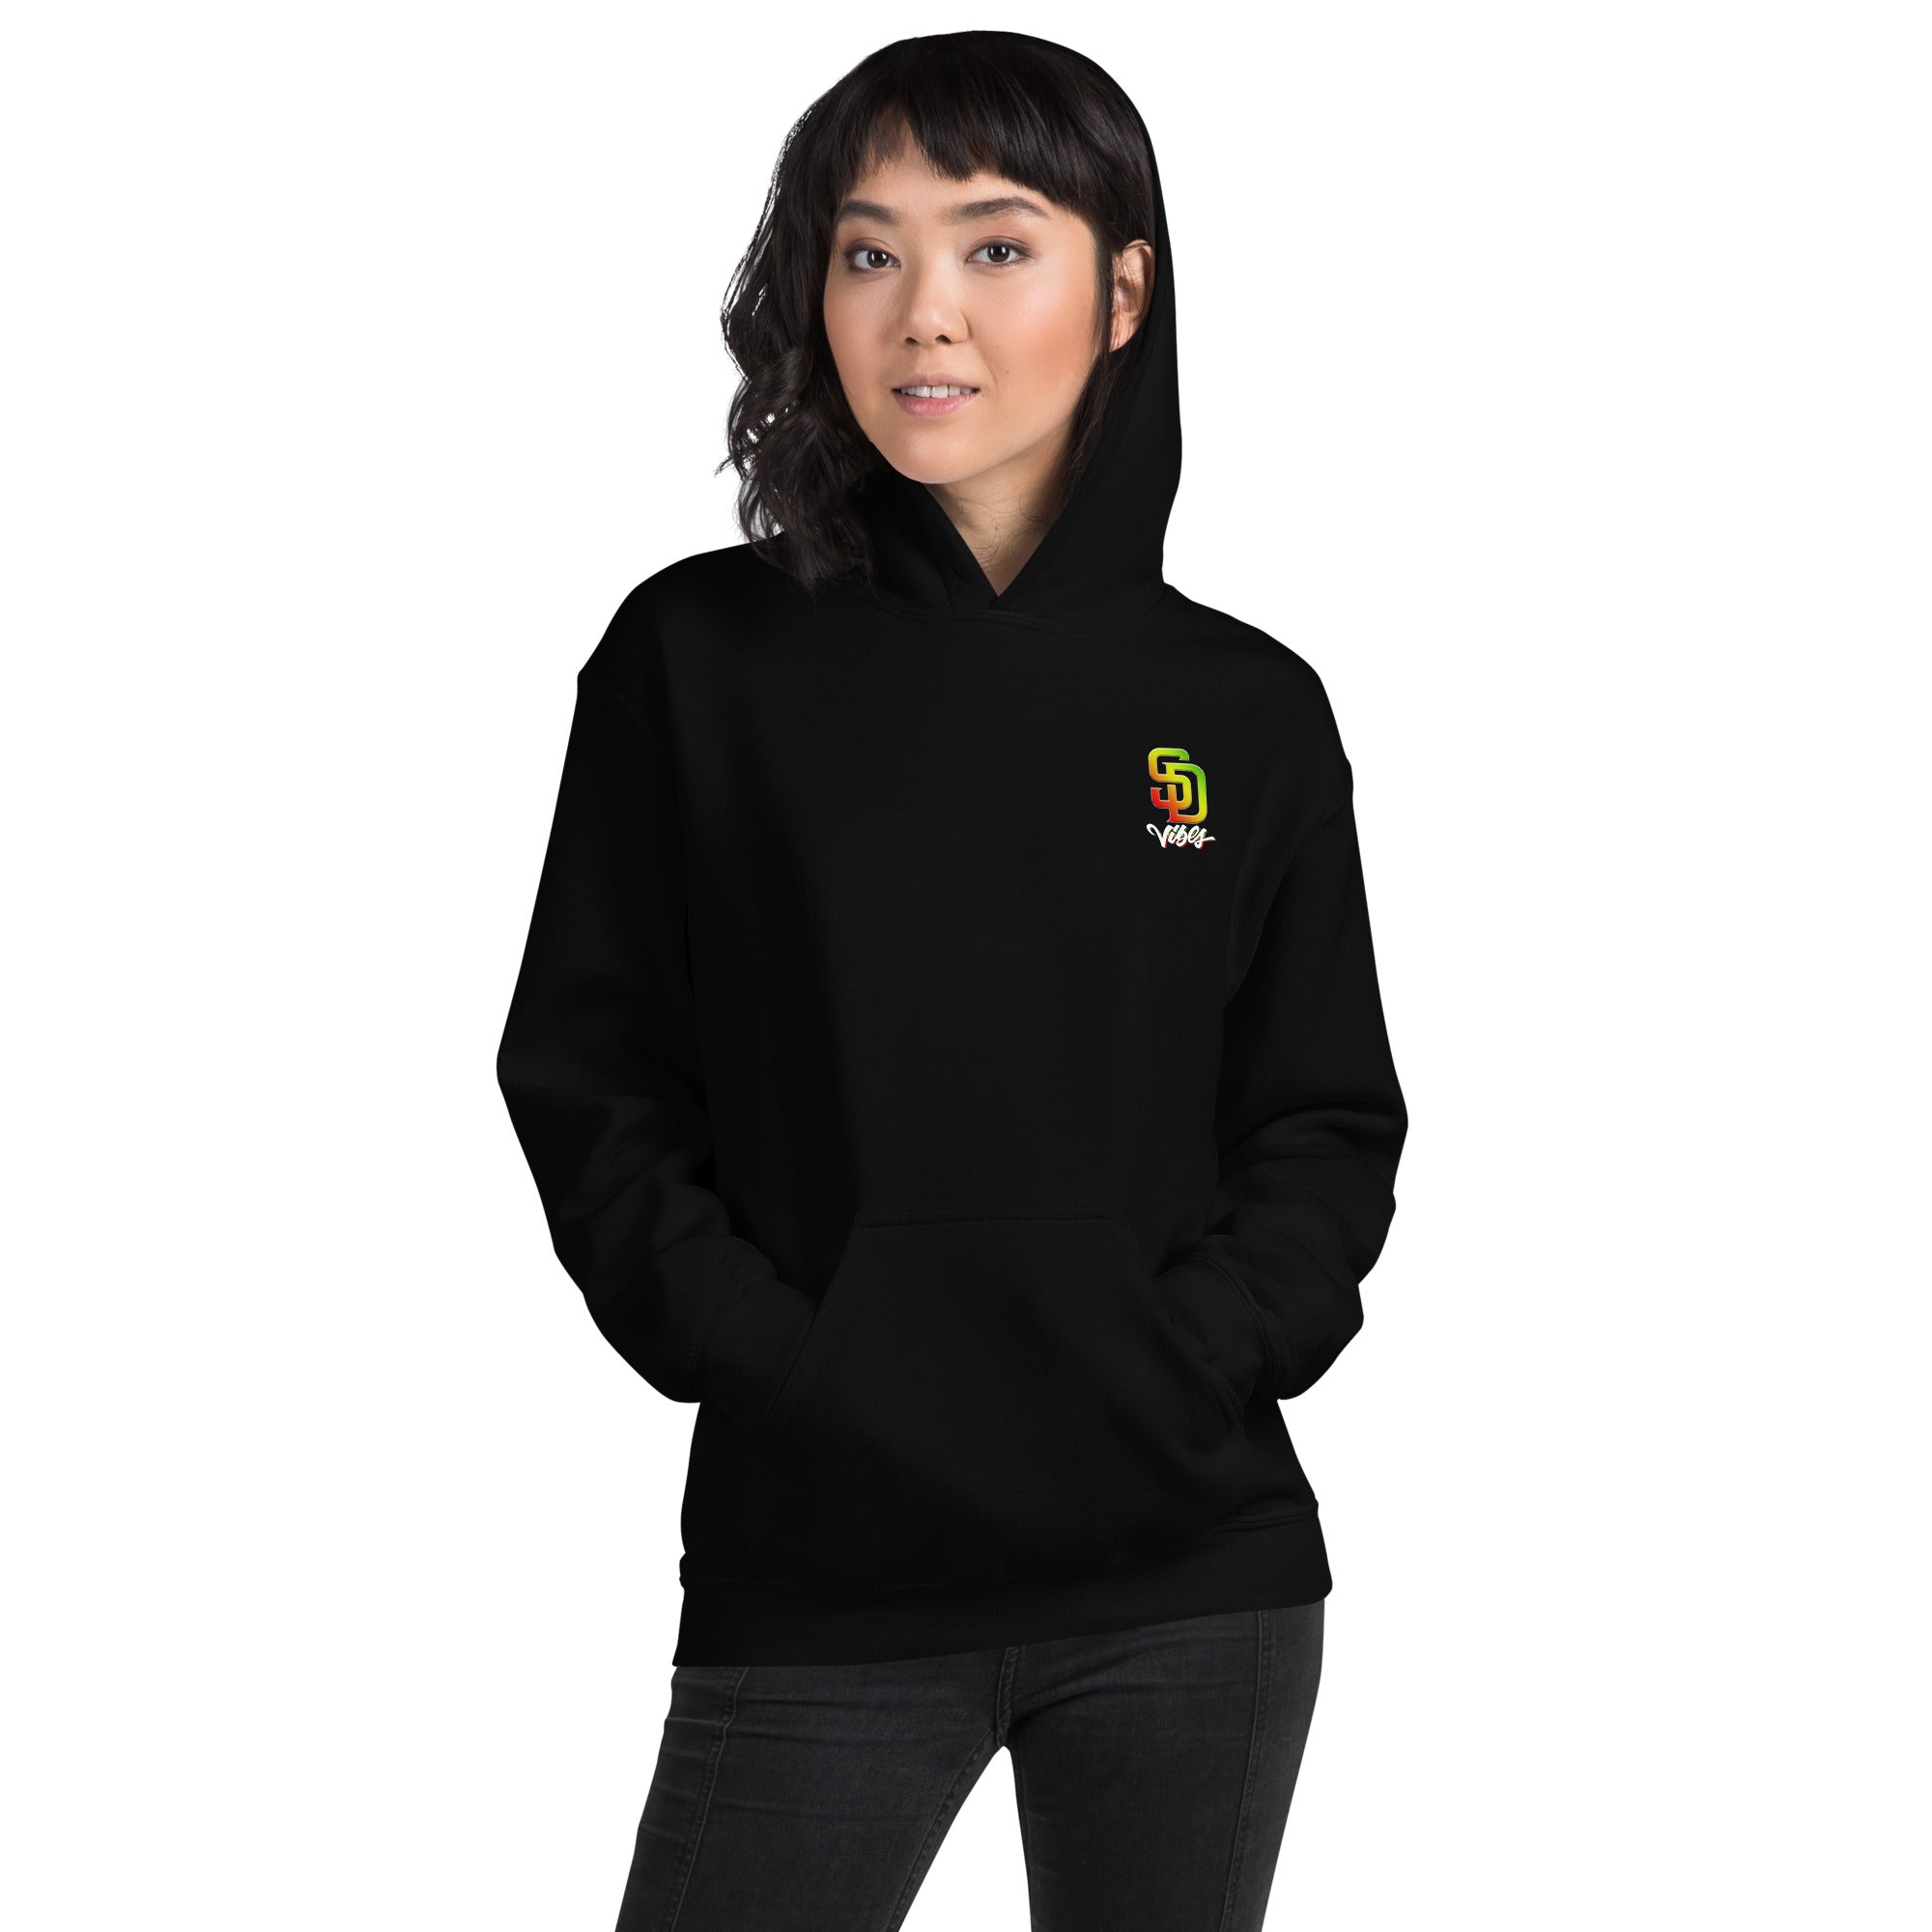 SD Vibes Hoodie (2 colors) - Sun Drenched Vibes